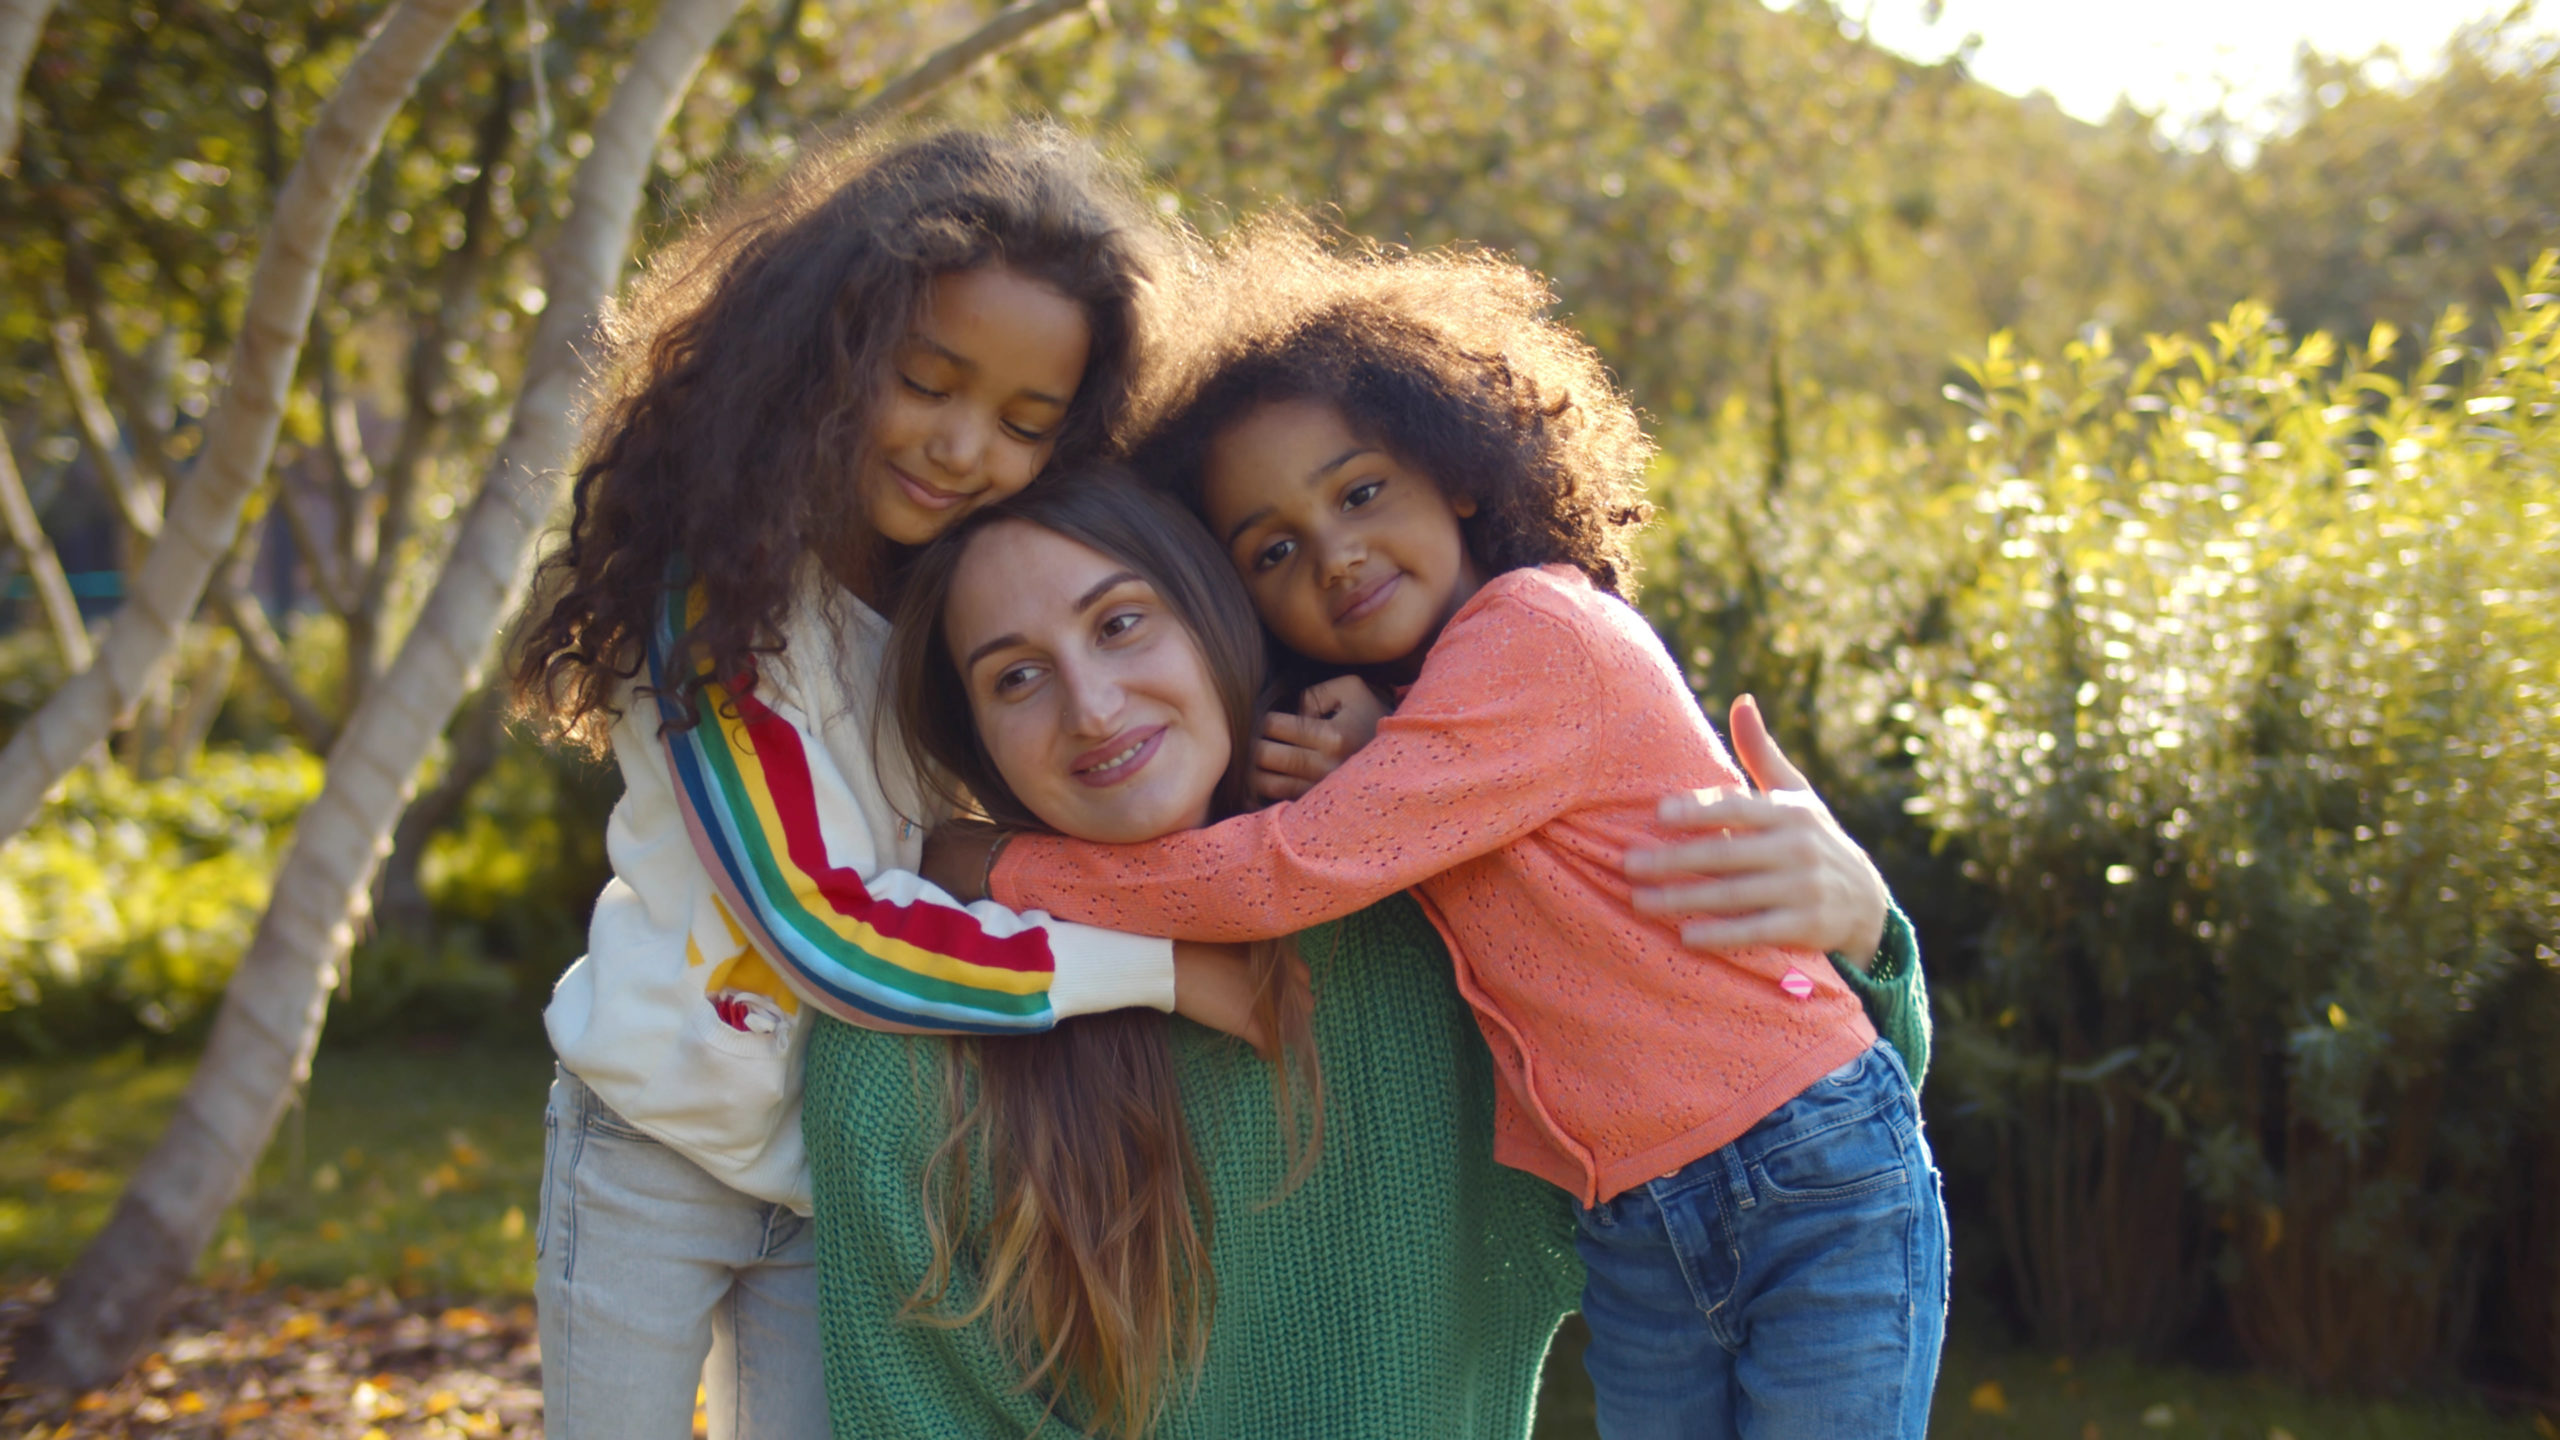 Smiling white woman and her two biracial children hugging her in a park.